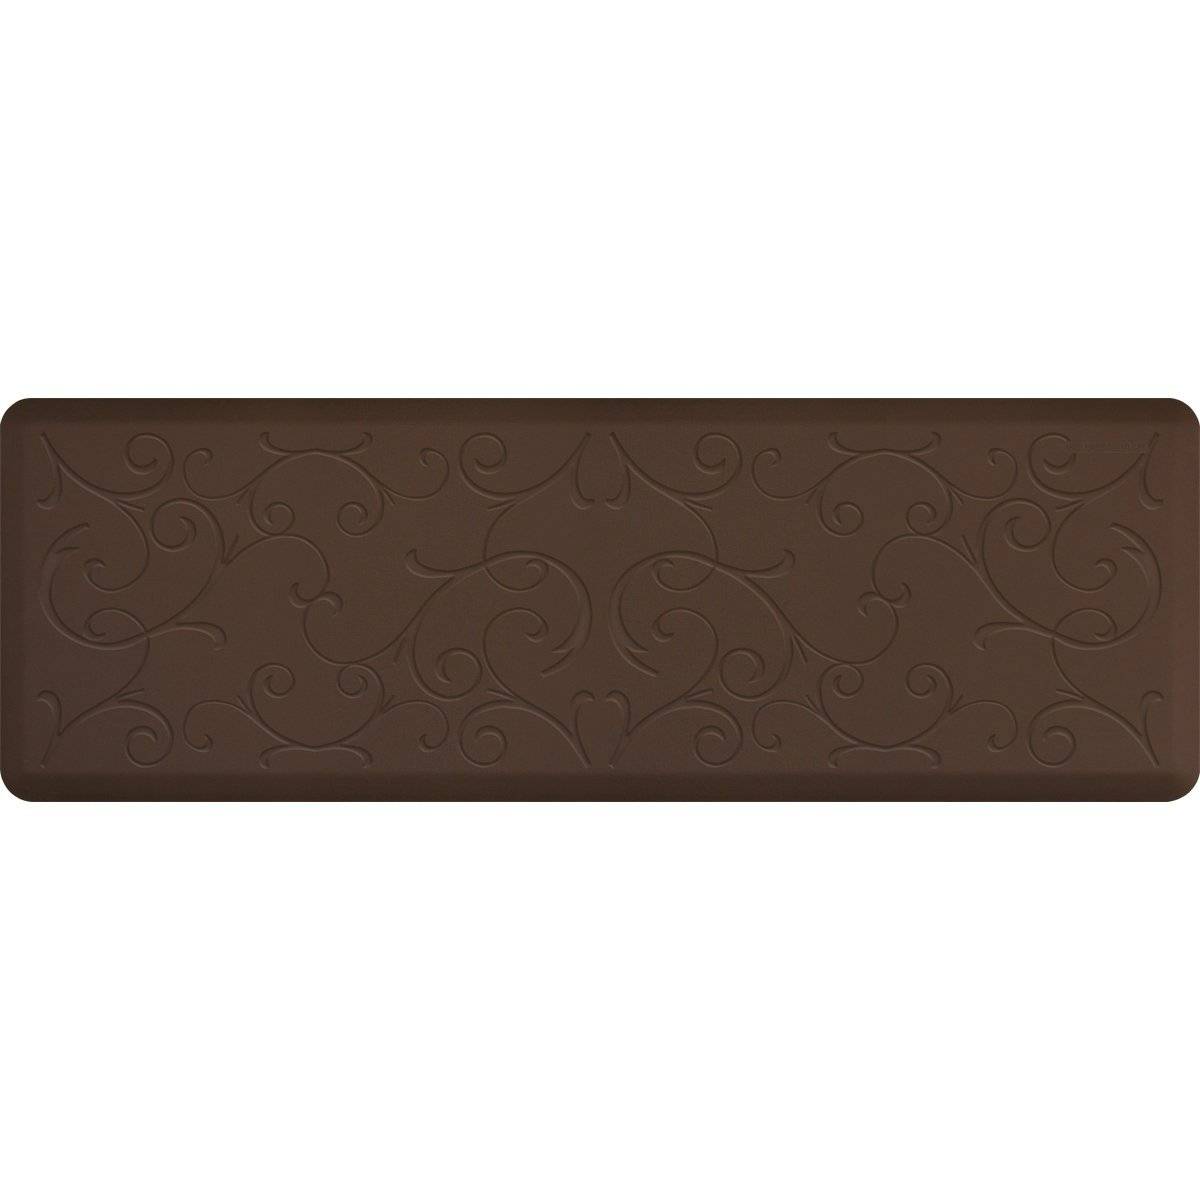 WellnessMats Bella Motif 6' X 2' MB62WMRBRN, Brown A floor mat that has smooth surface. An ergo mat that gives comfort and relaxation while working in the kitchen or in any part of the house.